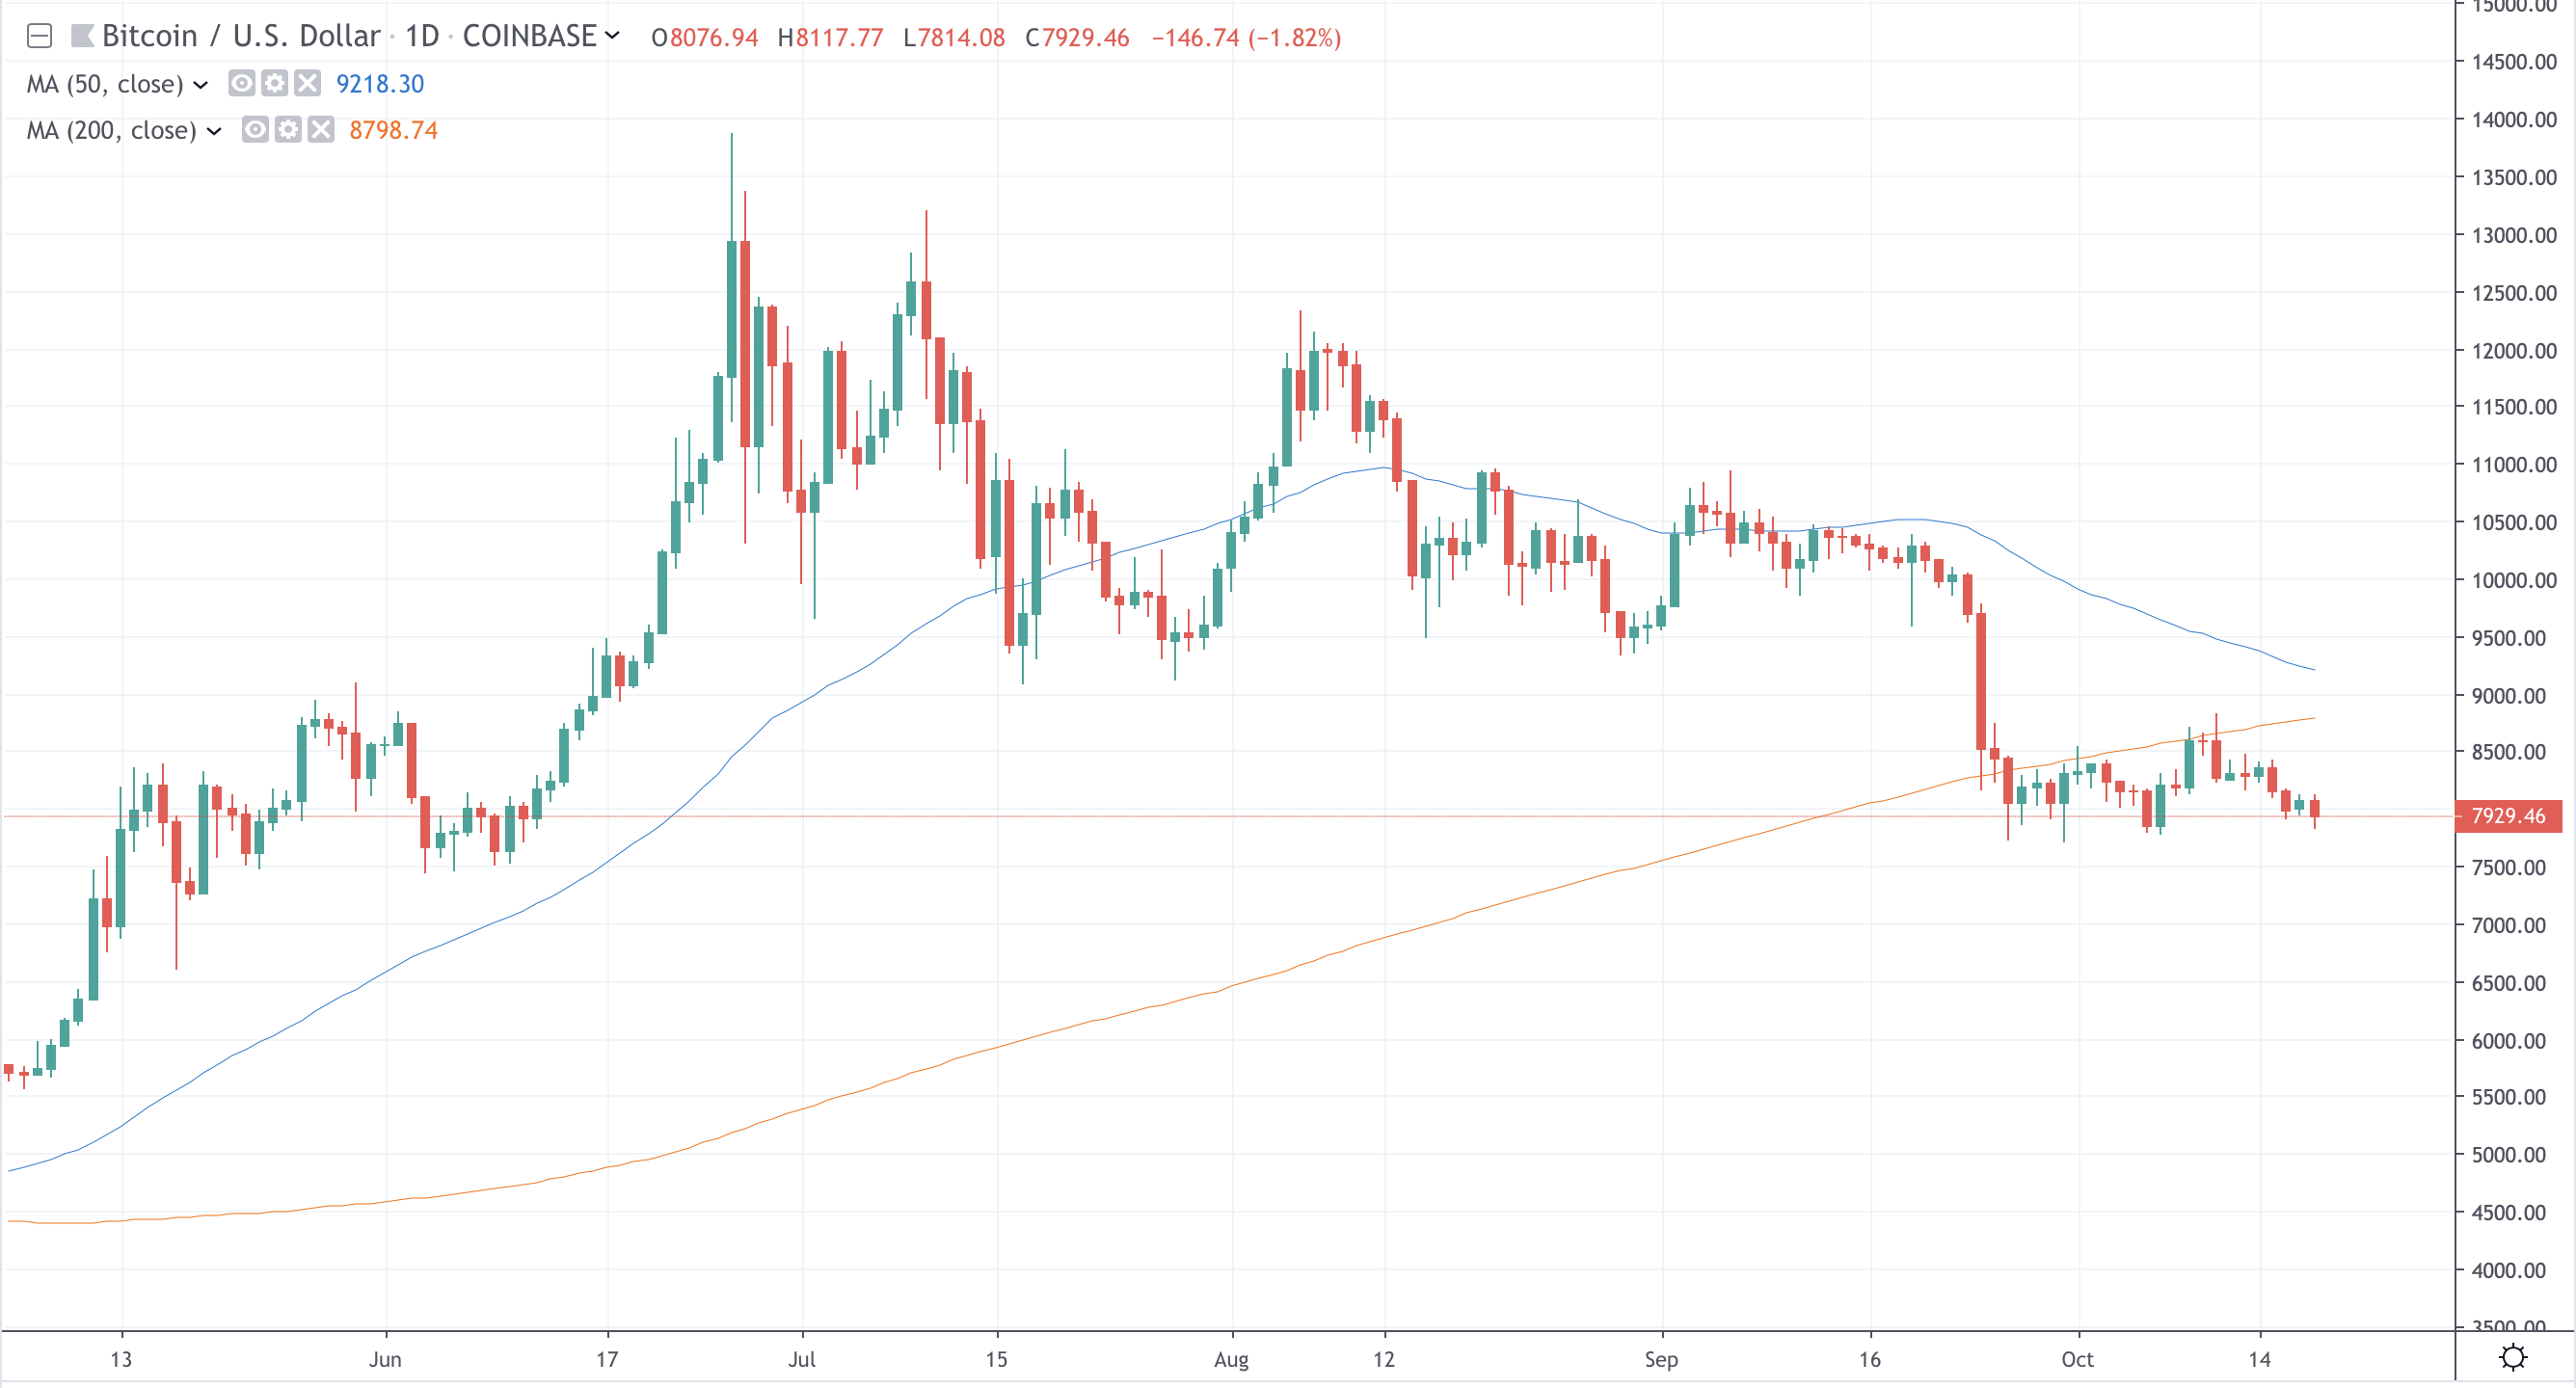 Bitcoin price falling below support